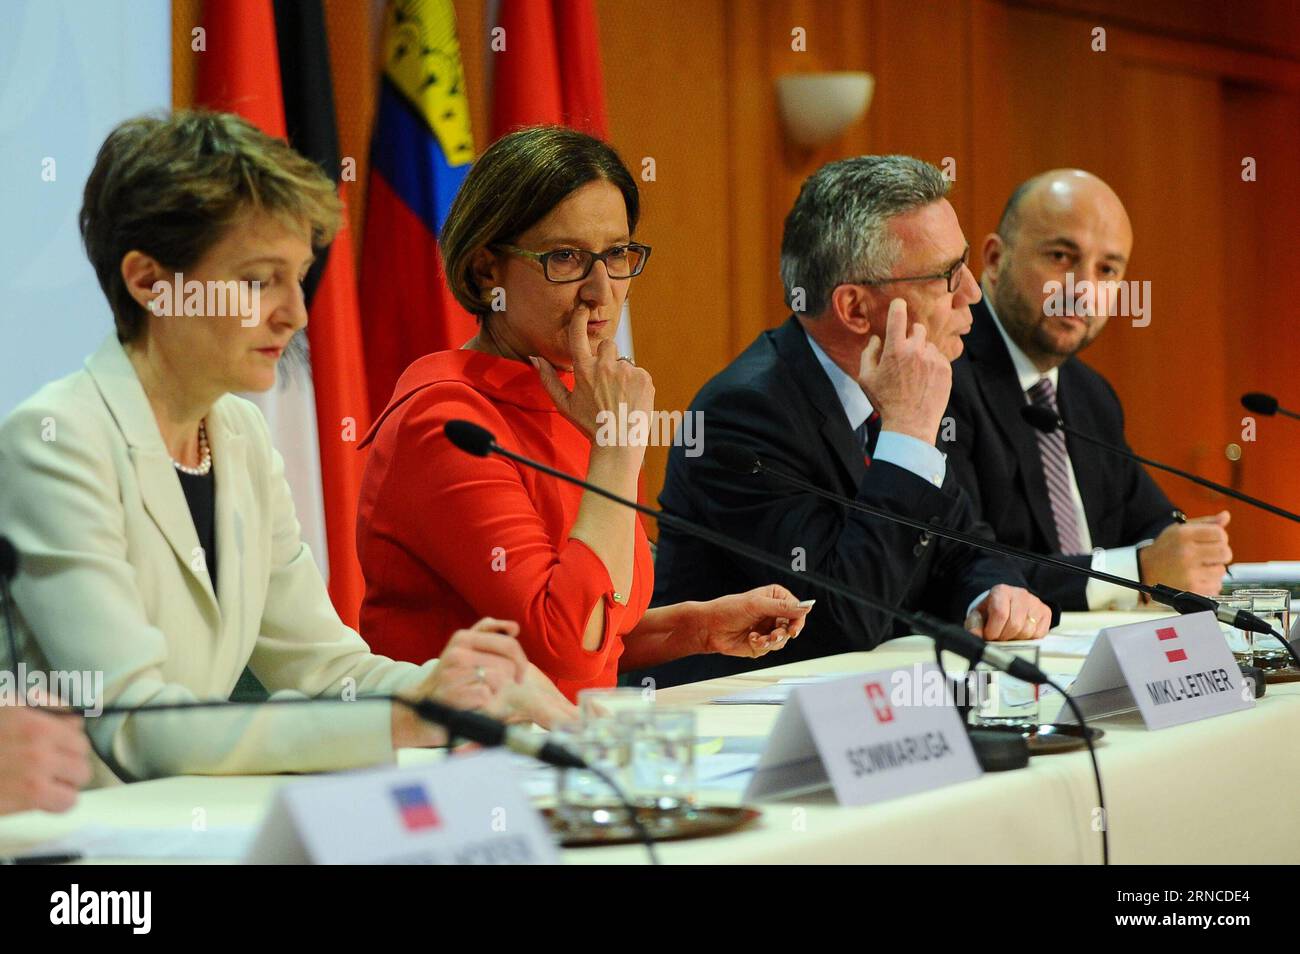 (160406) -- VIENNA, April 5, 2016 -- (L-R) Swiss Justice Minister Simonetta Sommaruga, Austrian Interior Minister Johanna Mikl-Leitner, German Interior Minister Thomas de Maiziere and Luxembourg Minister of Interior Security Etienne Schneider attend a press conference after a meeting in Vienna, Austria, April 5, 2016. The officials held a meeting in Vienna on Tuesday to discuss issues related to refugees. ) (cl) AUSTRIA-VIENNA-MEETING QianxYi PUBLICATIONxNOTxINxCHN   Vienna April 5 2016 l r Swiss Justice Ministers Simonetta Sommaruga Austrian Interior Ministers Johanna Mikl Leitner German Inte Stock Photo